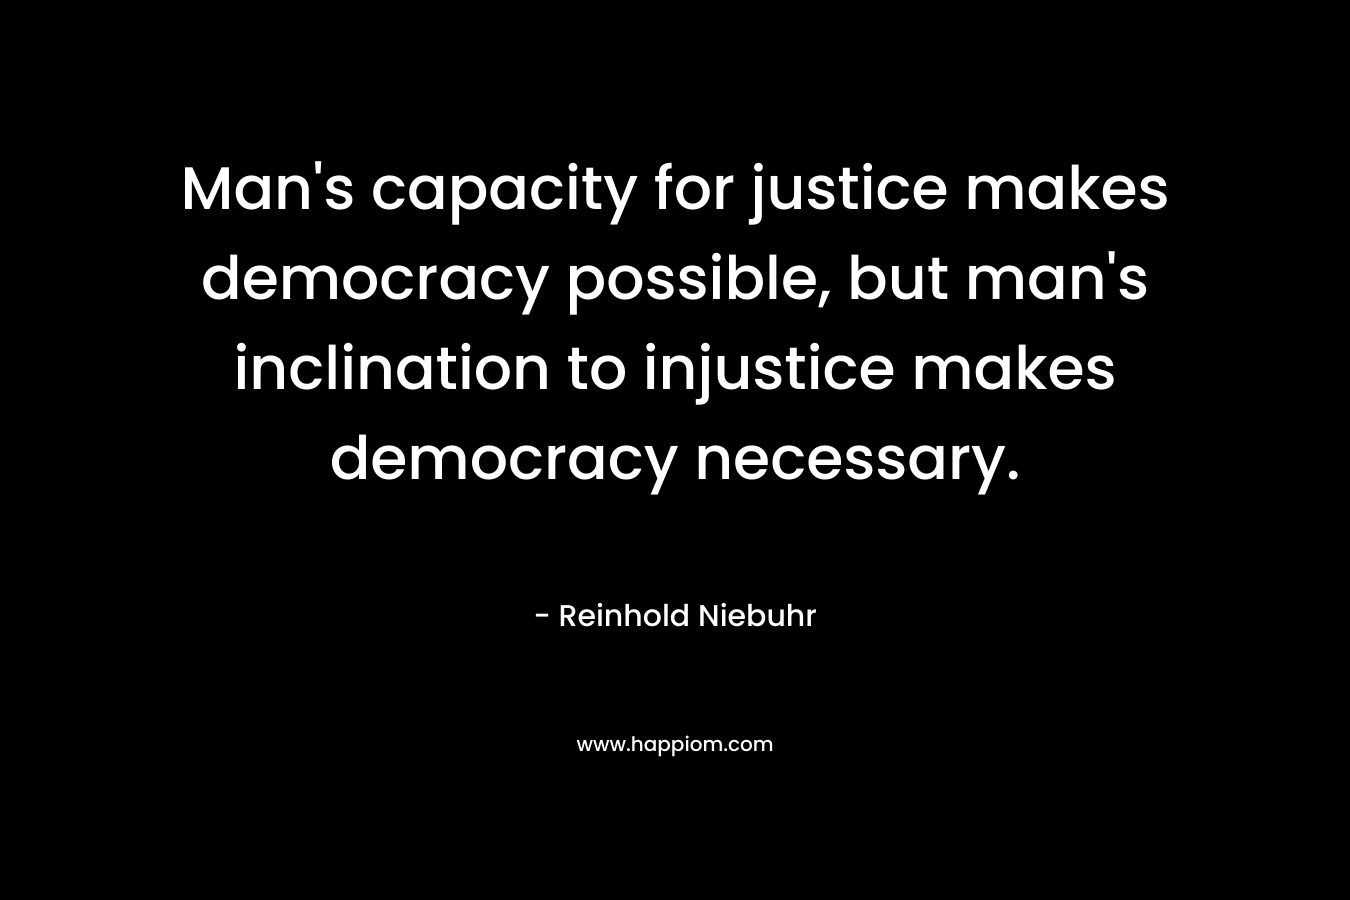 Man's capacity for justice makes democracy possible, but man's inclination to injustice makes democracy necessary.